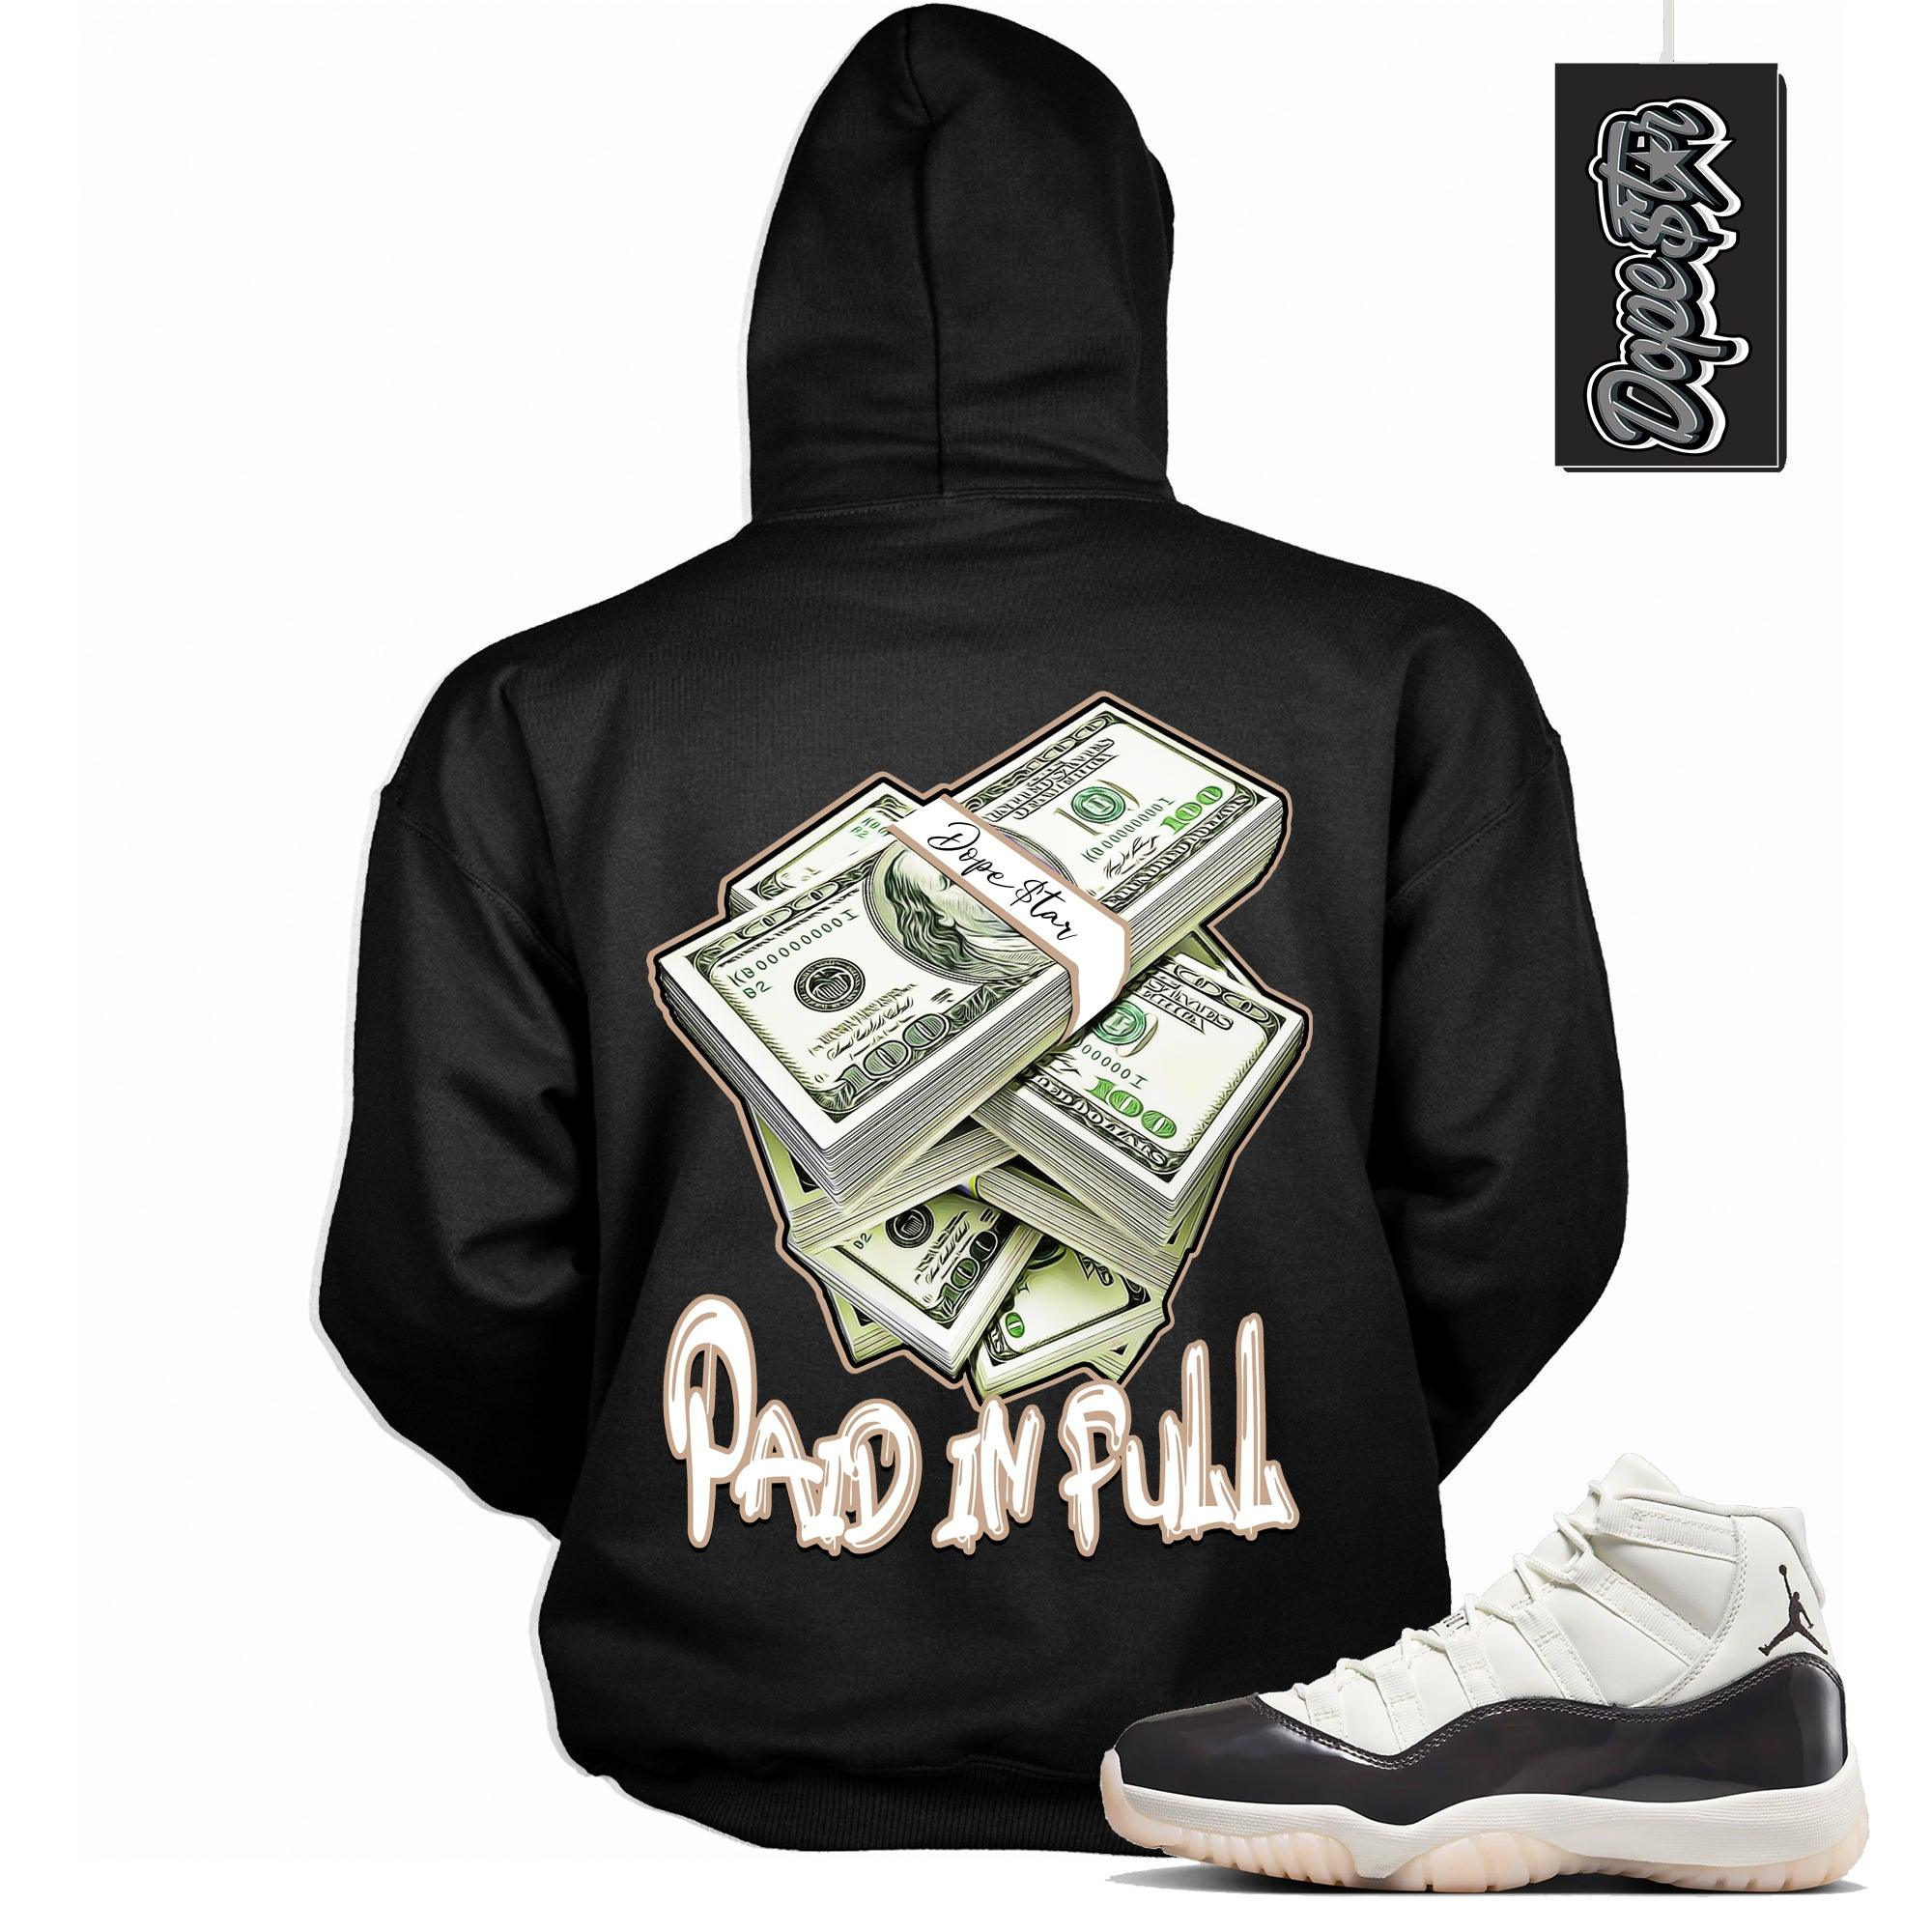 Cool Black Graphic Hoodie with “ Paid In Full “ print, that perfectly matches Air Jordan 11 Neapolitan sneakers